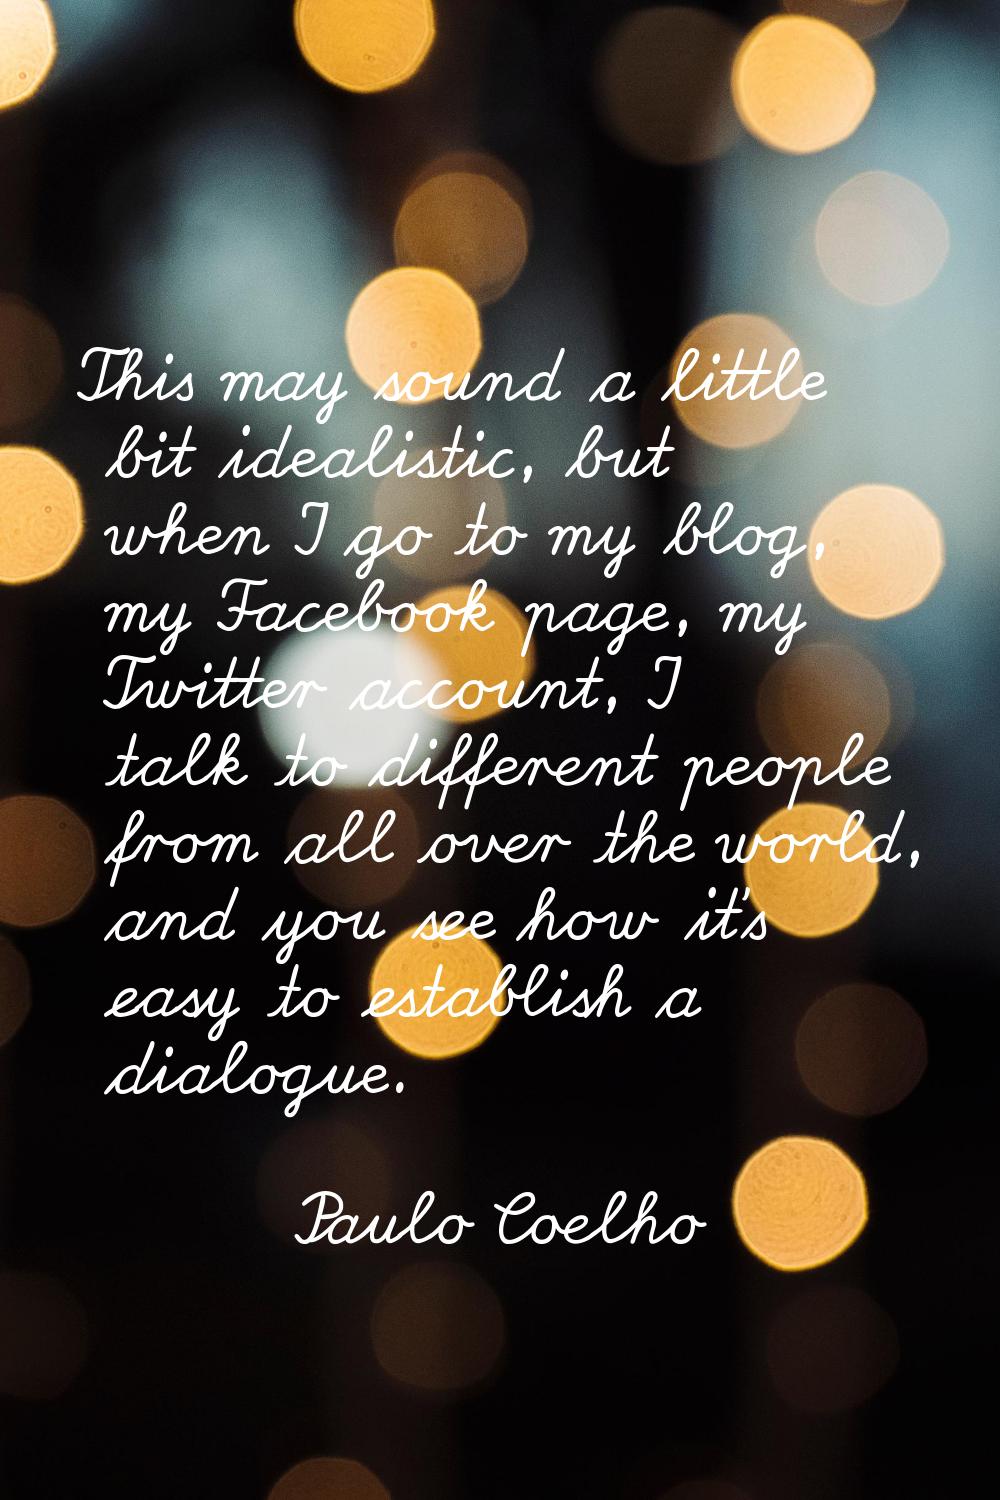 This may sound a little bit idealistic, but when I go to my blog, my Facebook page, my Twitter acco